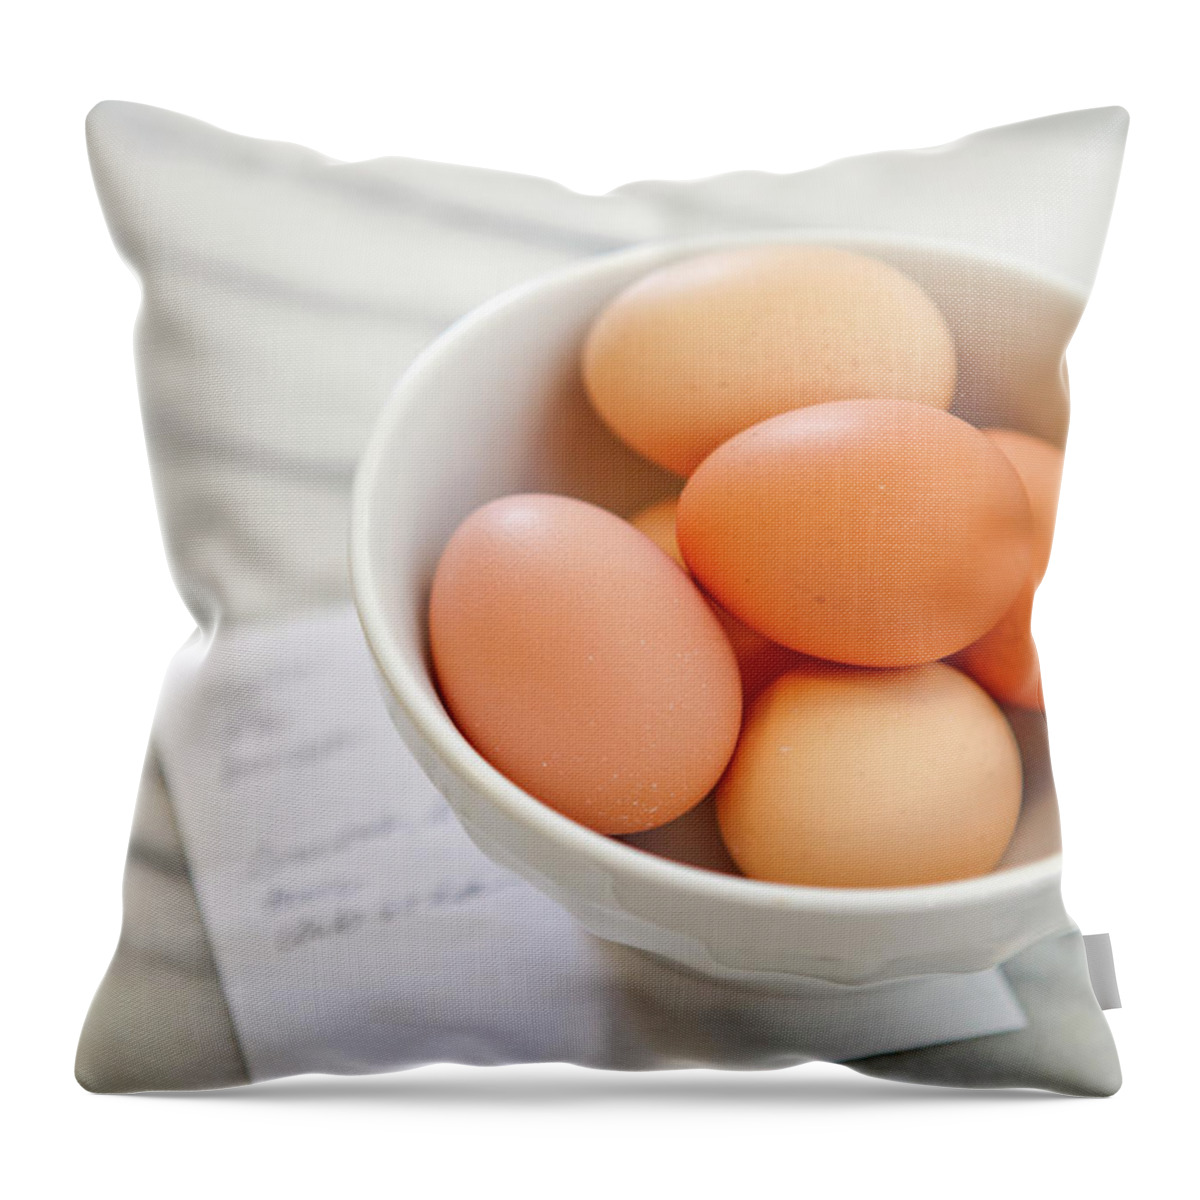 Heap Throw Pillow featuring the photograph Whole Eggs And Grocery List by Leela Cyd